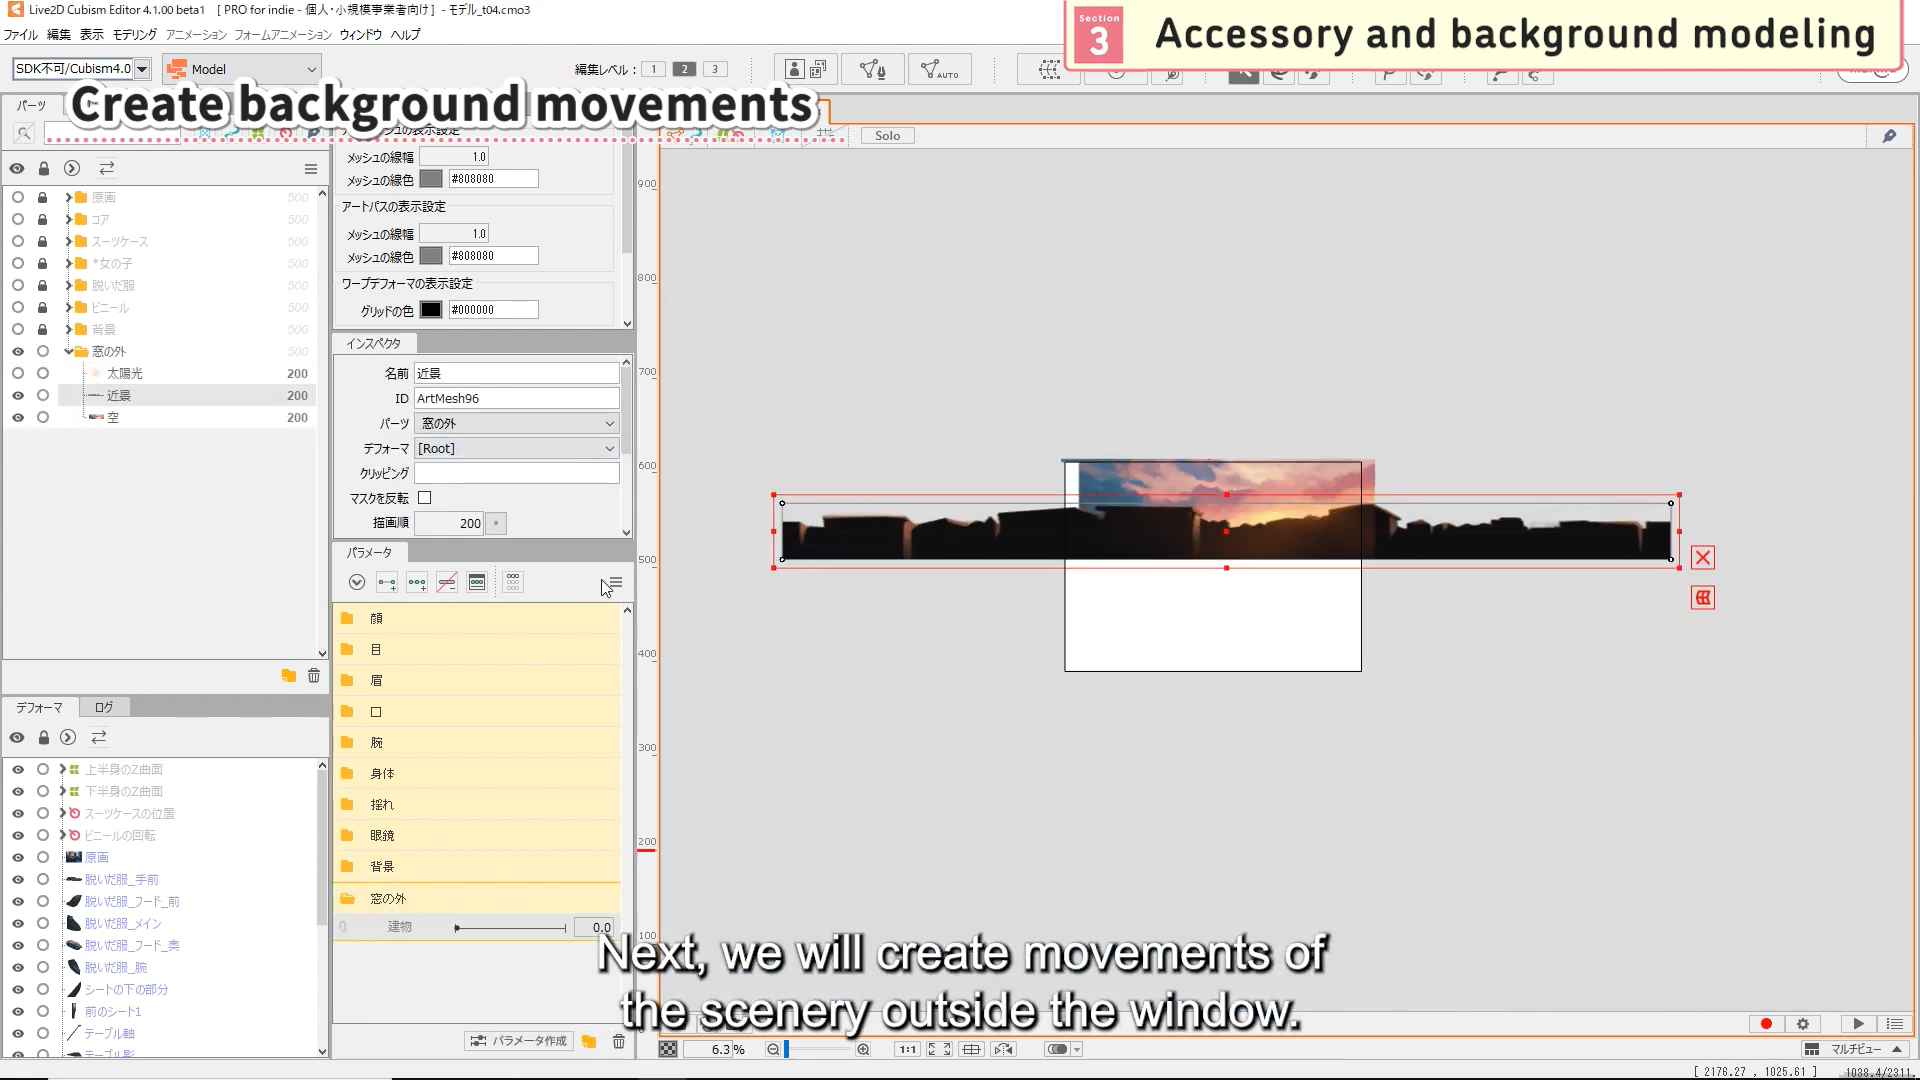 Create background movements